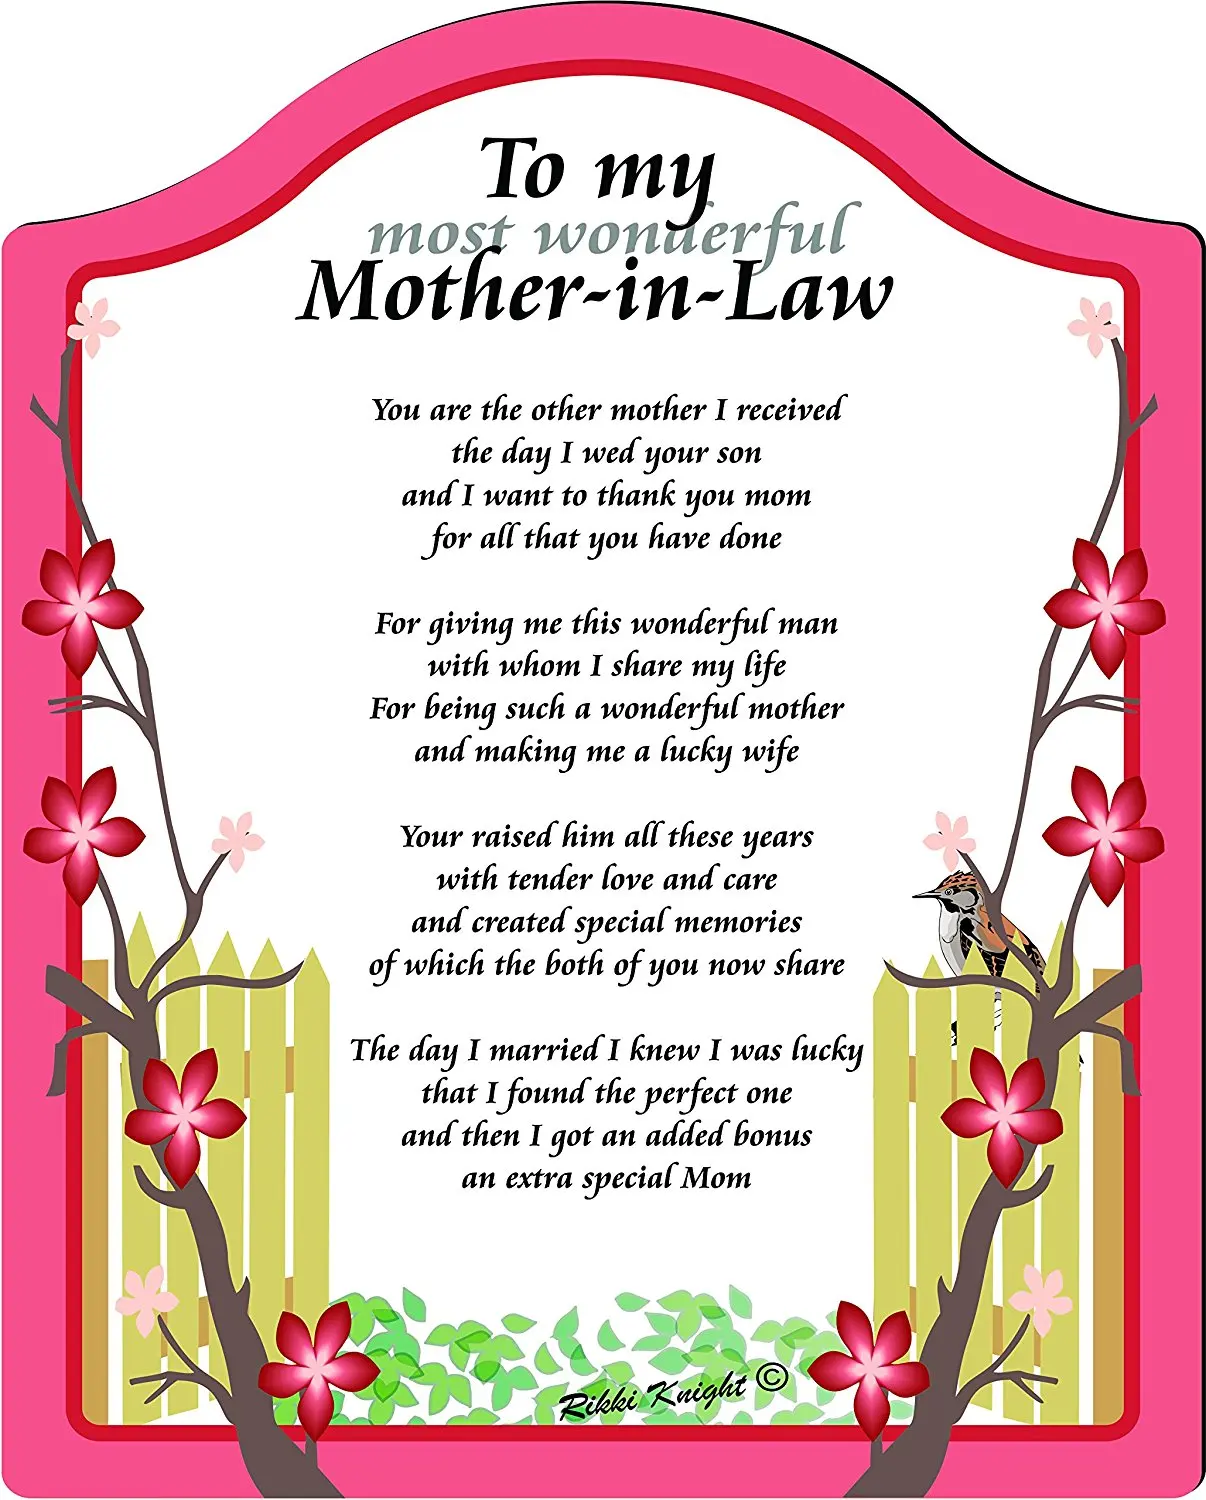 Personalized Poem For Mother In Law Thoughtful Gift For Any Occasion ...